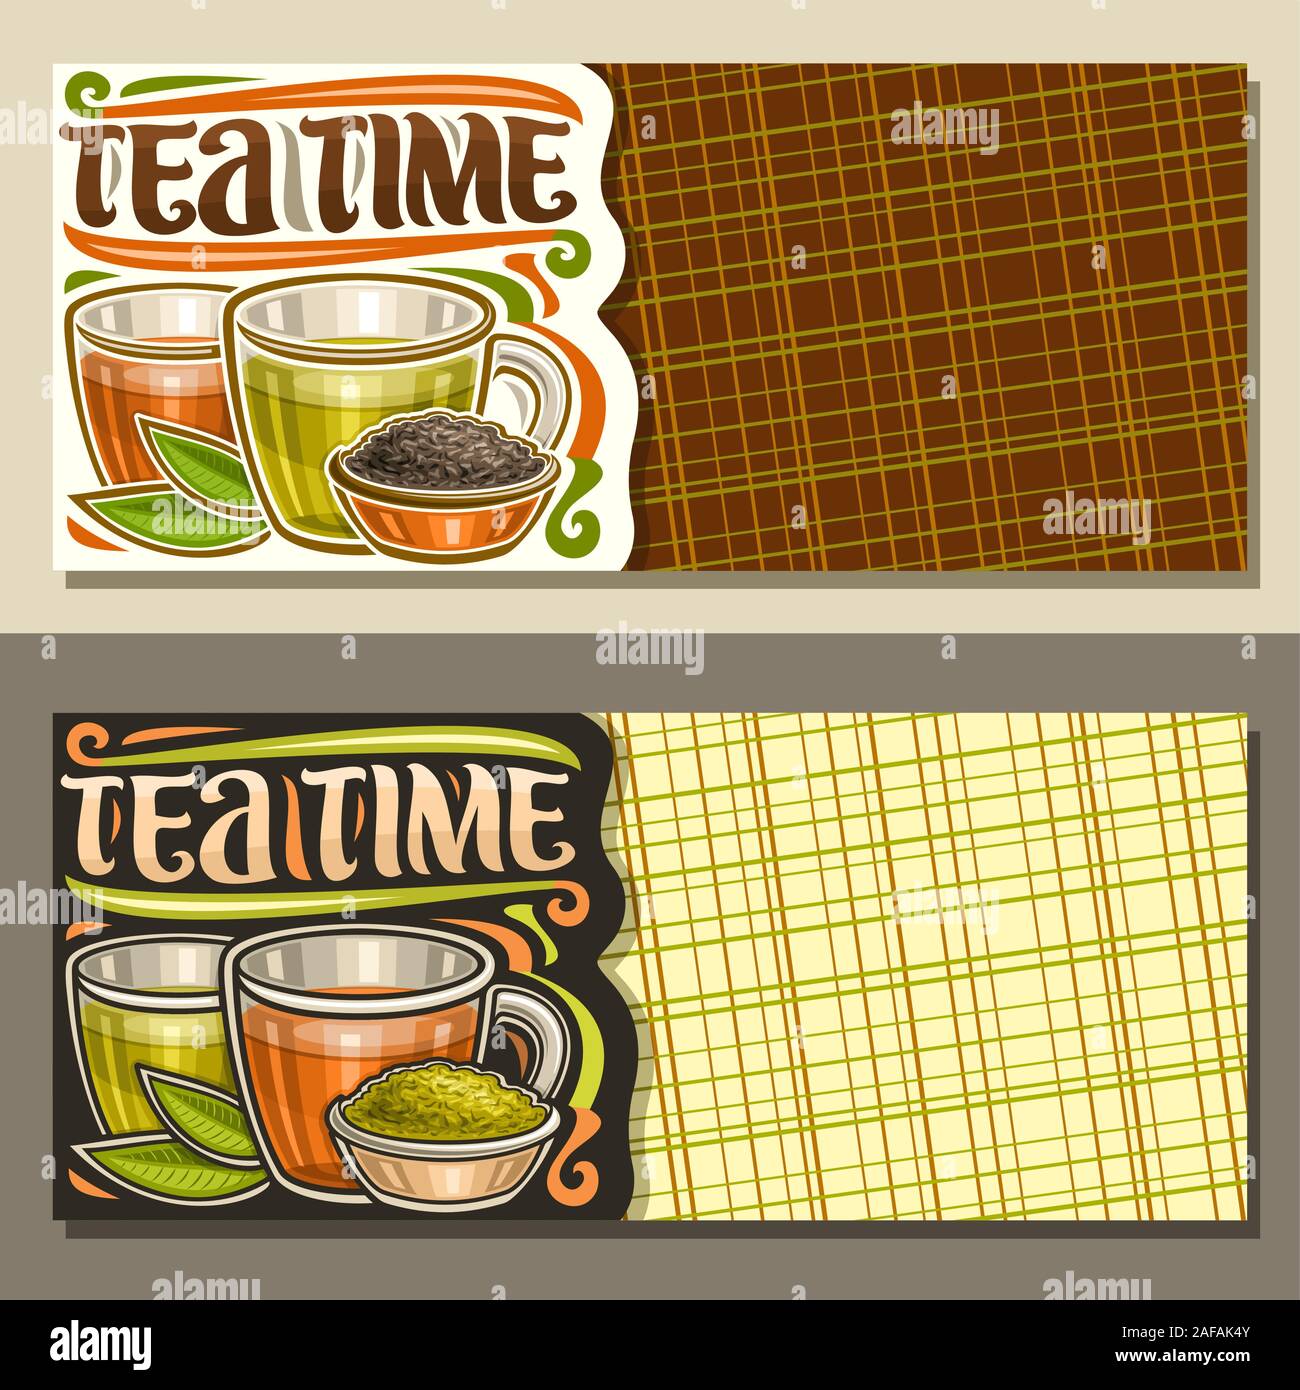 Vector layouts for Tea Time with copy space, illustration of 2 glass cups with yellow and brown liquid, metal bowl with loose tea, original decorative Stock Vector